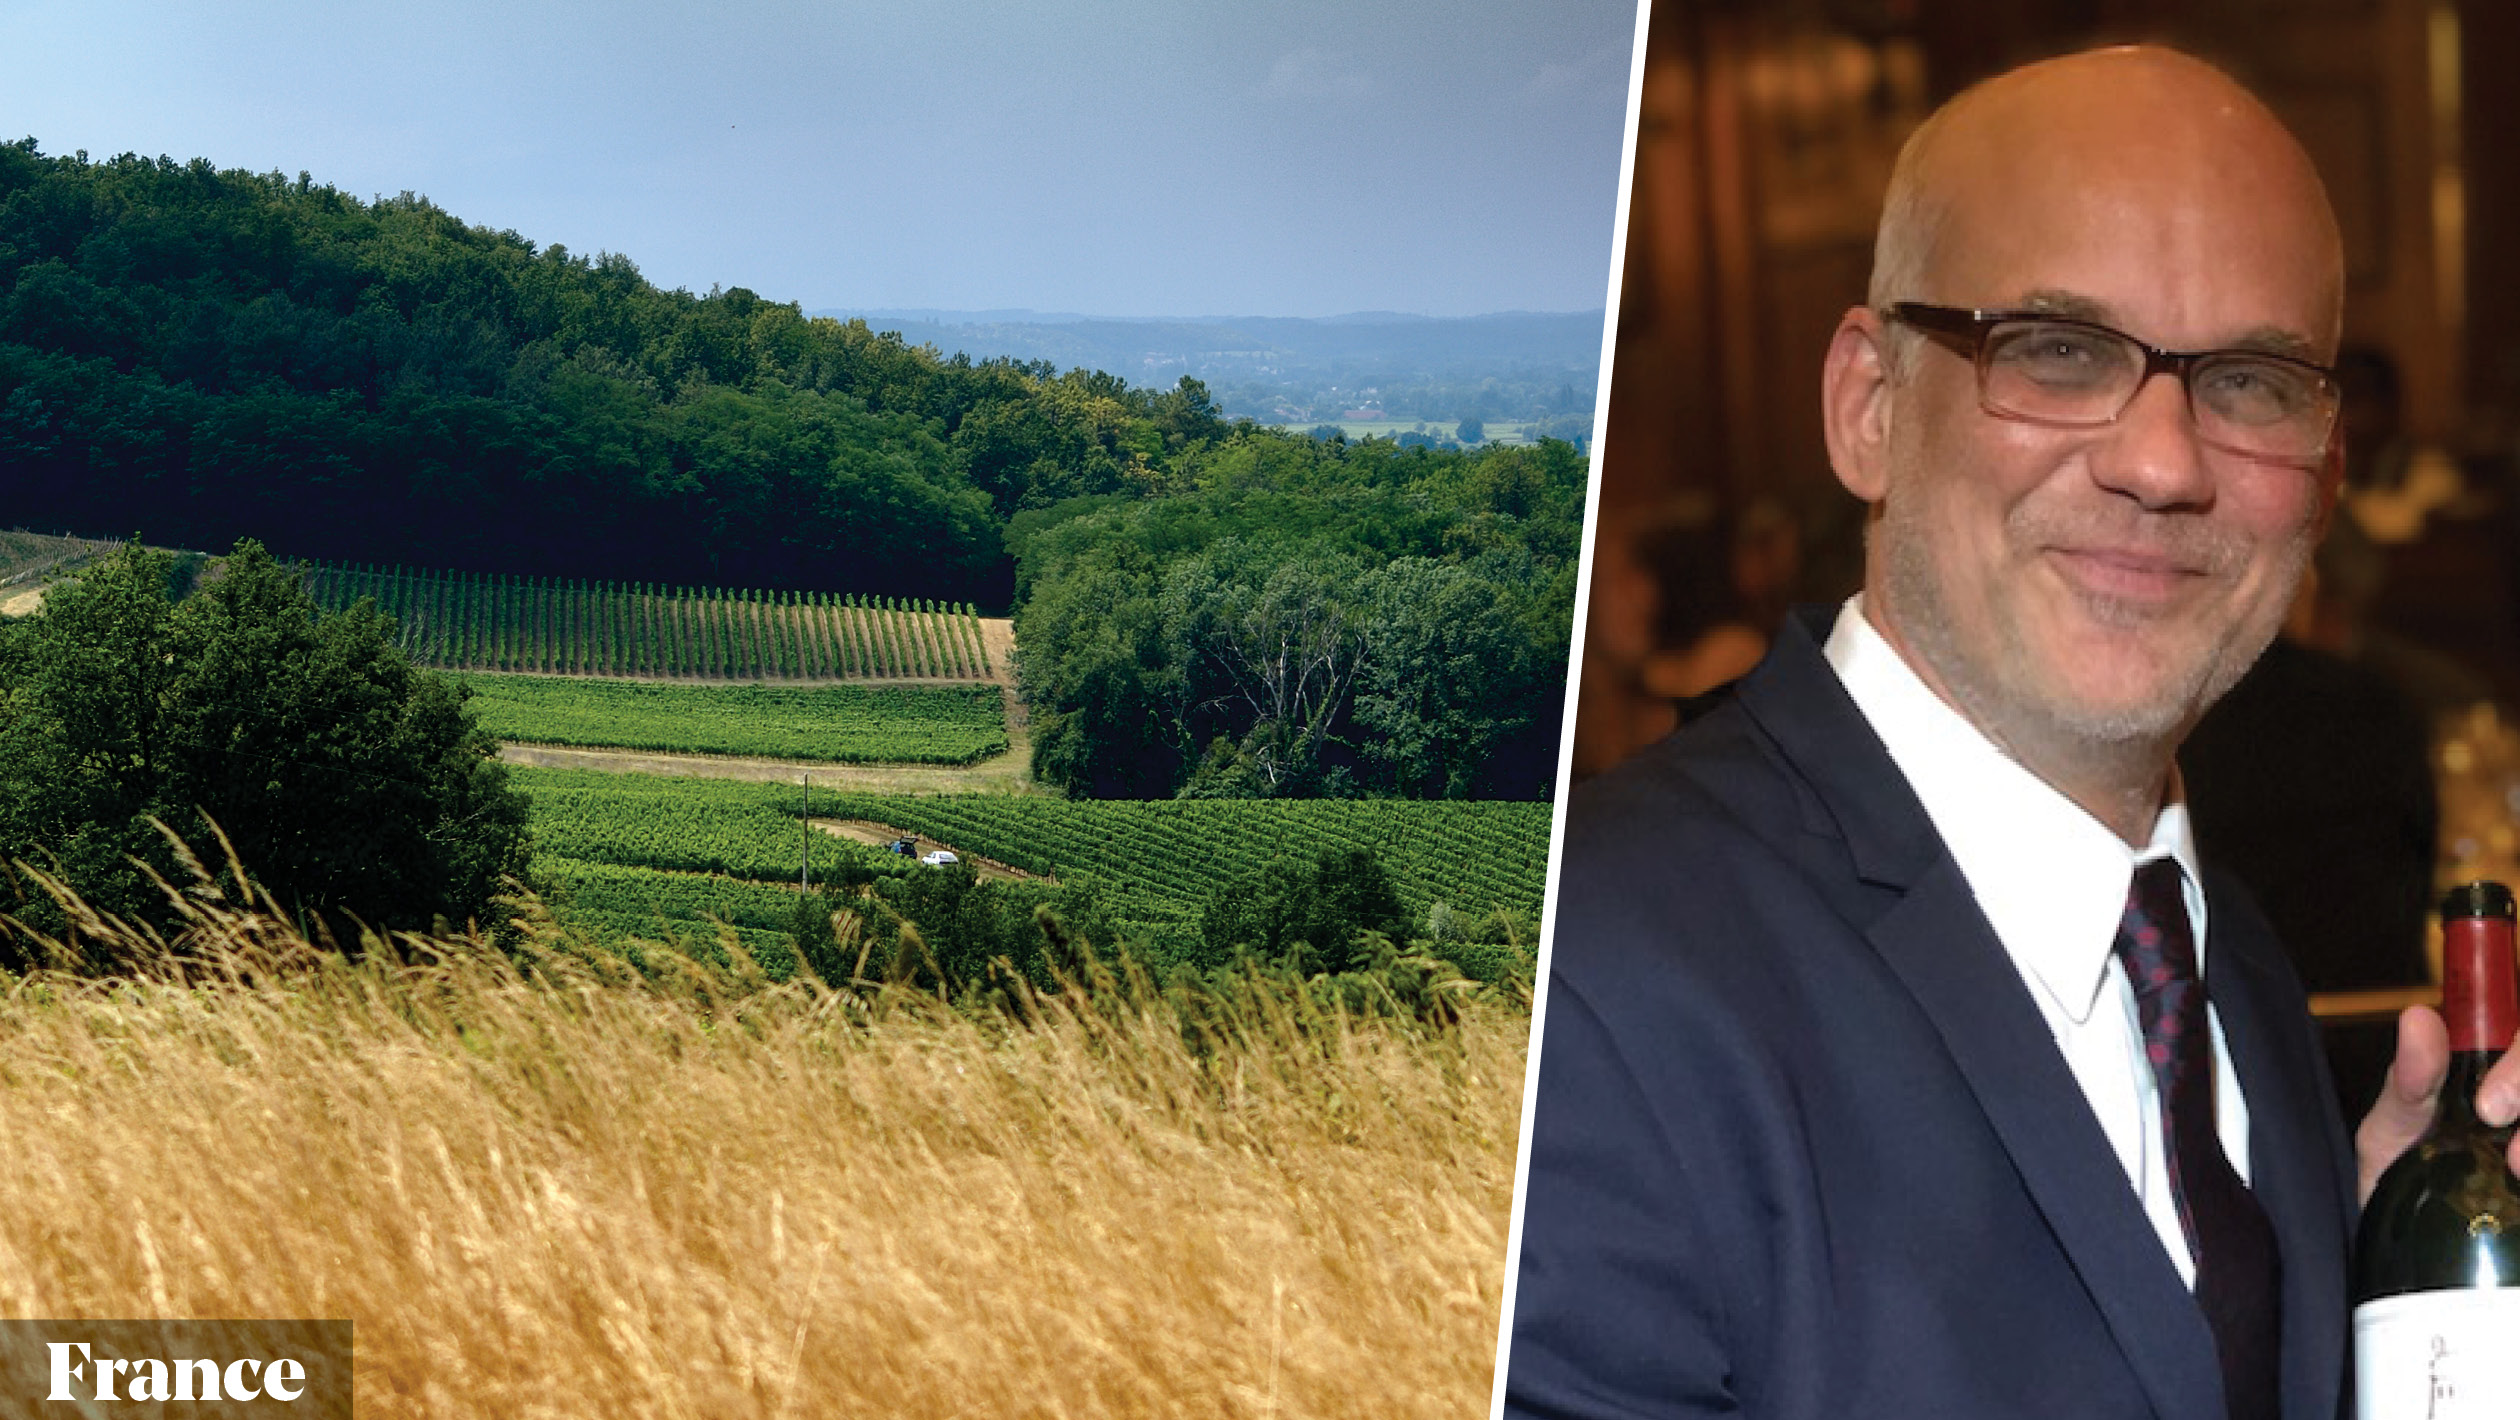 From left to right: the Castillon Côtes de Bordeaux region of France (photo courtesy of Syndicat Viticole de Castillon Côtes de Bordeaux); Jeff Harding, the wine director at Waverly Inn (photo courtesy of Waverly Inn).